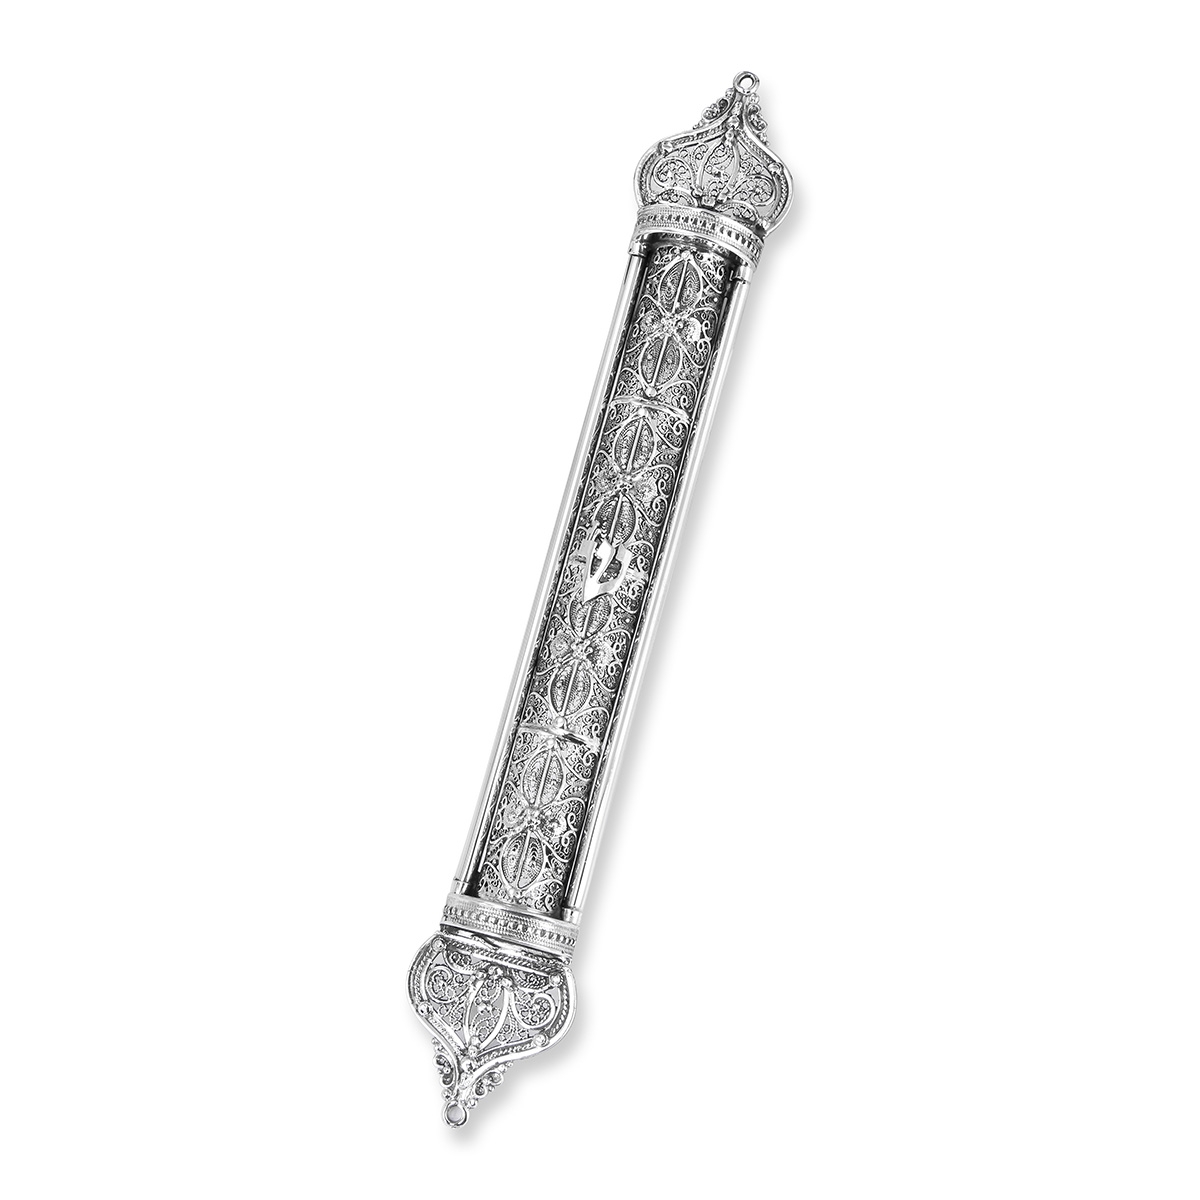 Traditional Yemenite Art Luxurious Extra Large Handcrafted Sterling Silver Mezuzah Case With Majestic Filigree Design - 1